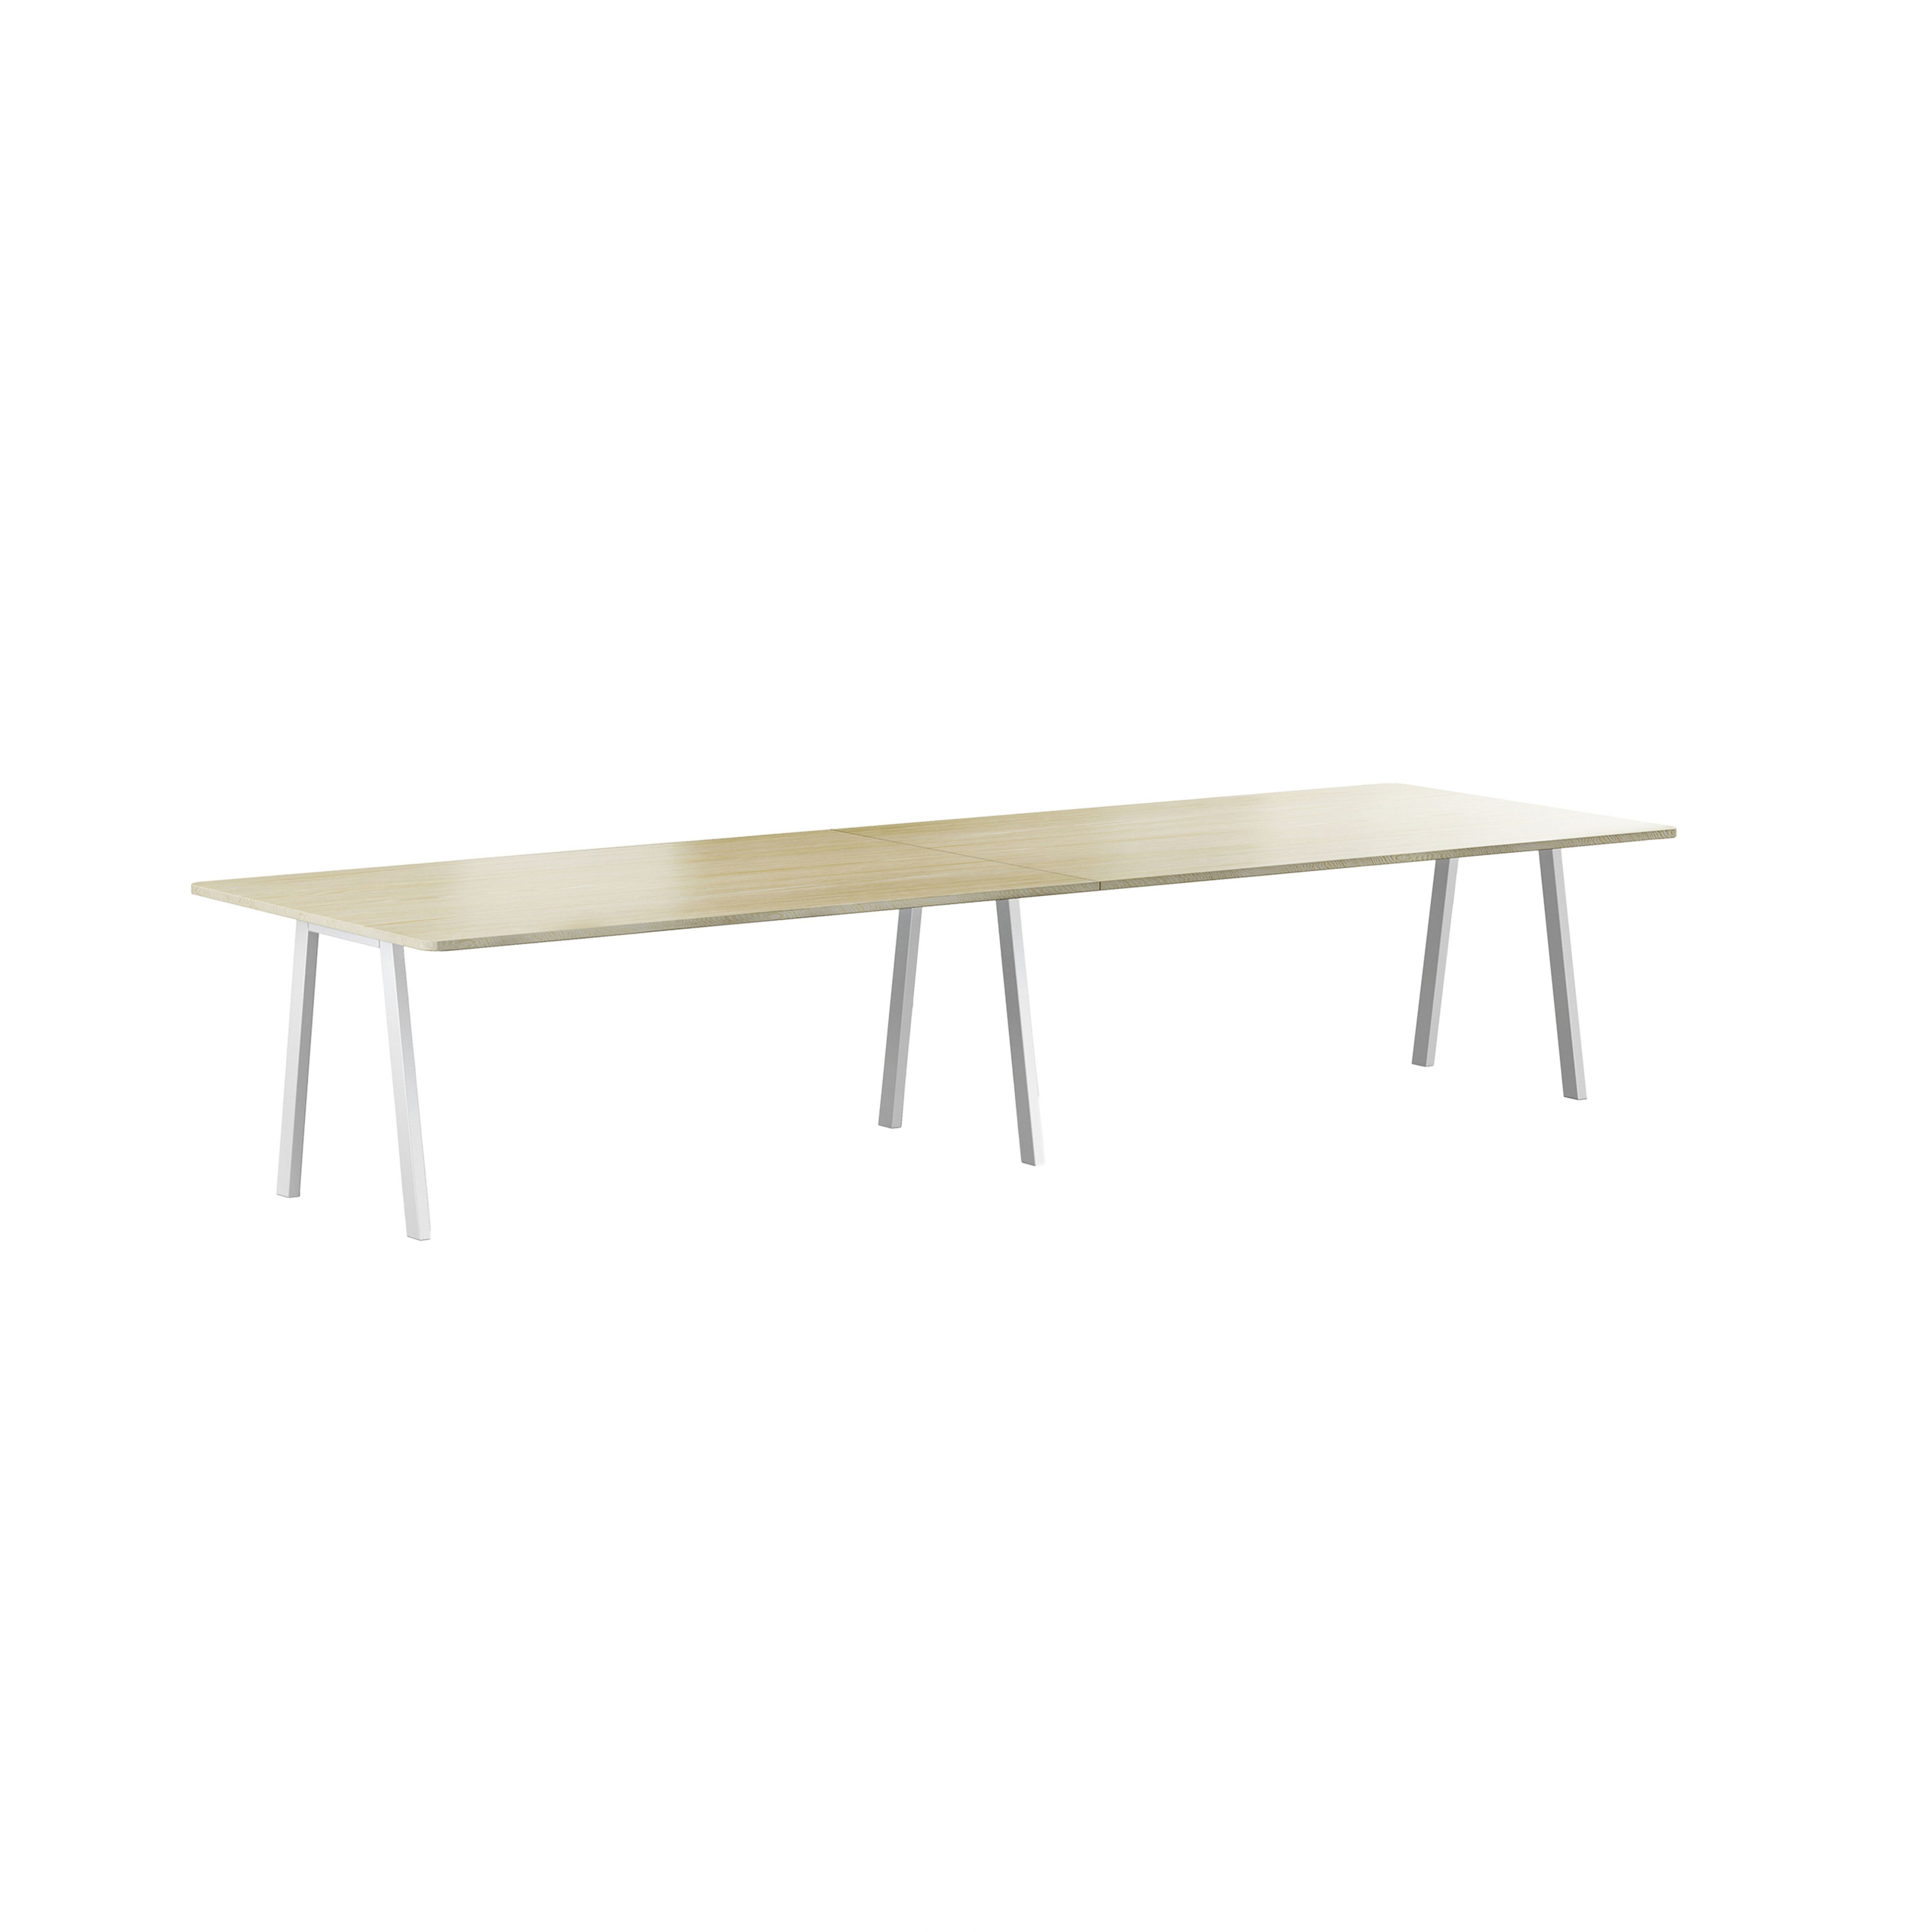 Collaborate Table with metal legs